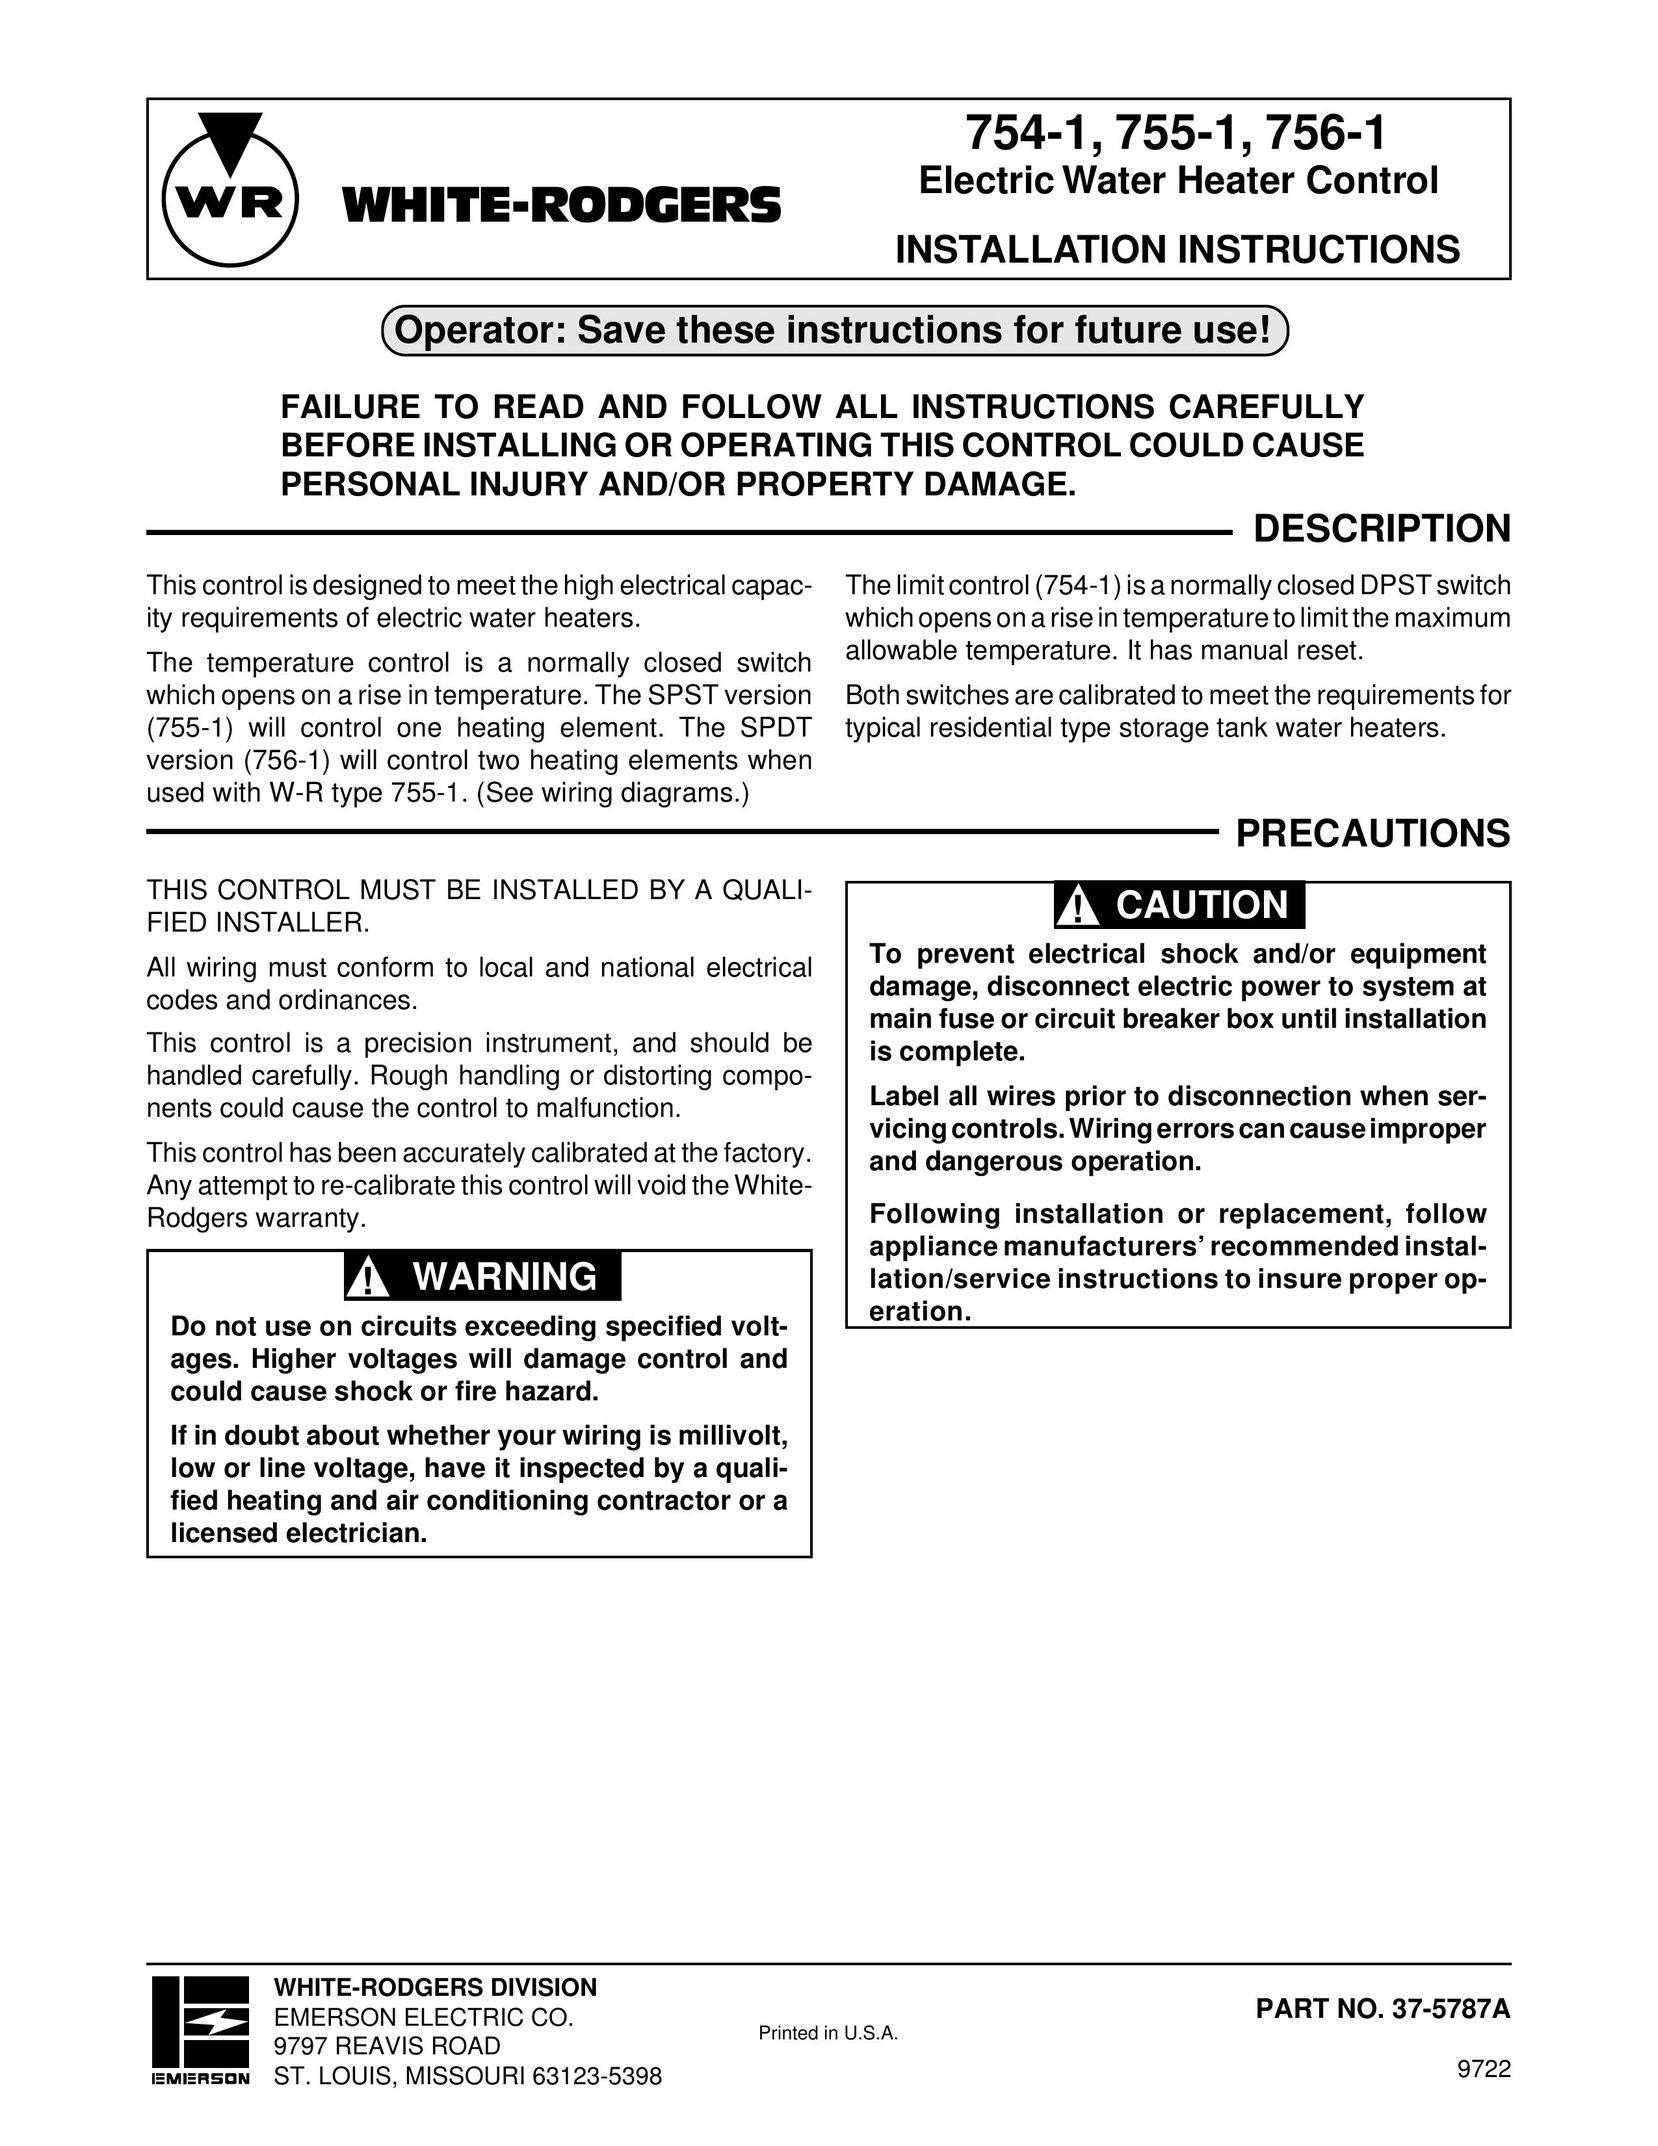 White Rodgers 754-1 Water Heater User Manual